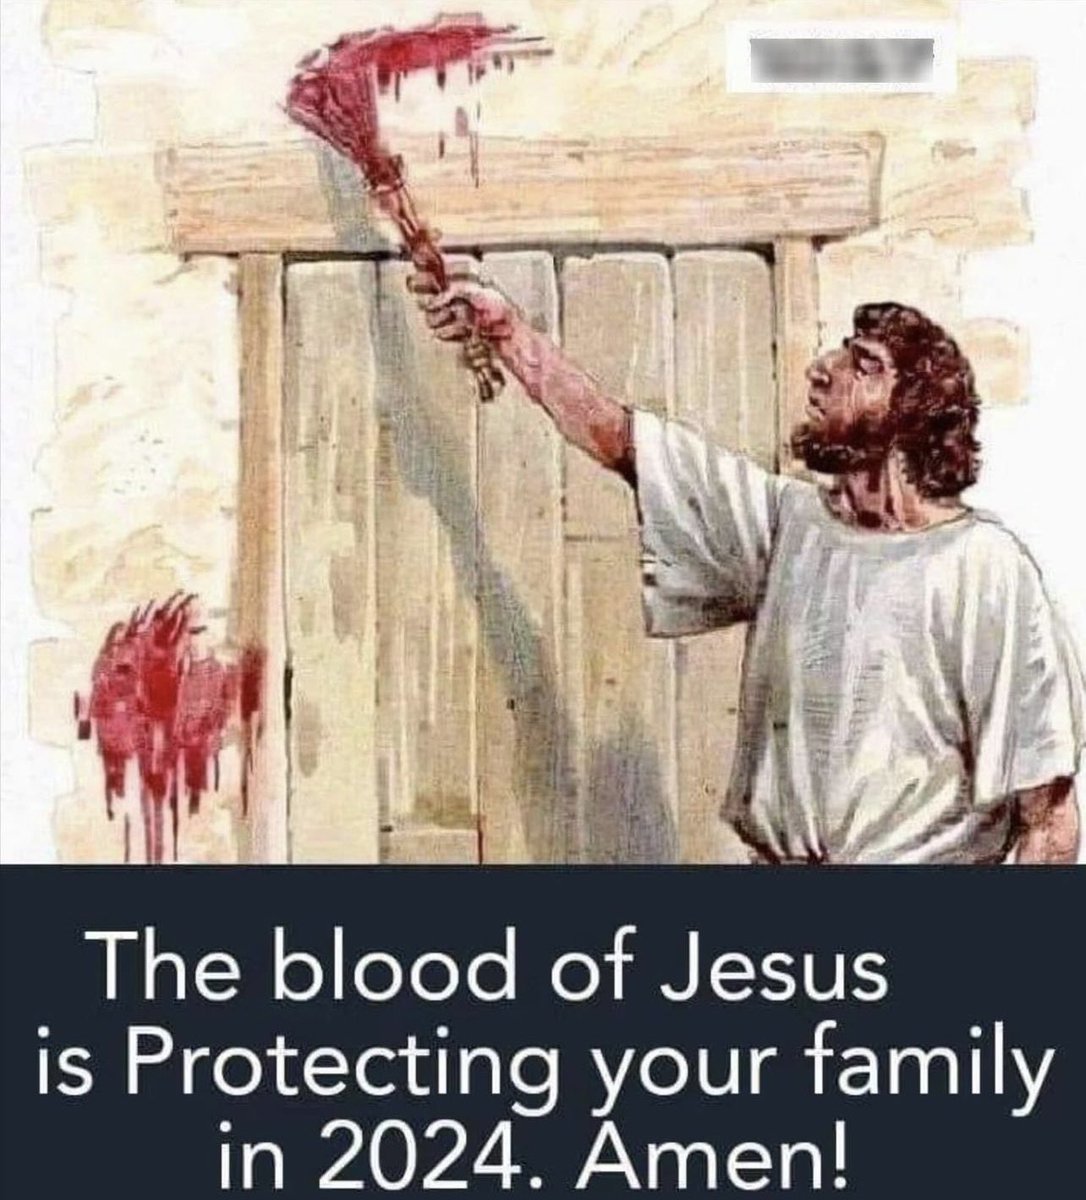 And the blood shall be to you for a token upon the houses where ye are: and when I see the blood, I will pass over you, and the plague shall not be upon you to destroy you, when I smite the land of Egypt. - Exodus 12:13